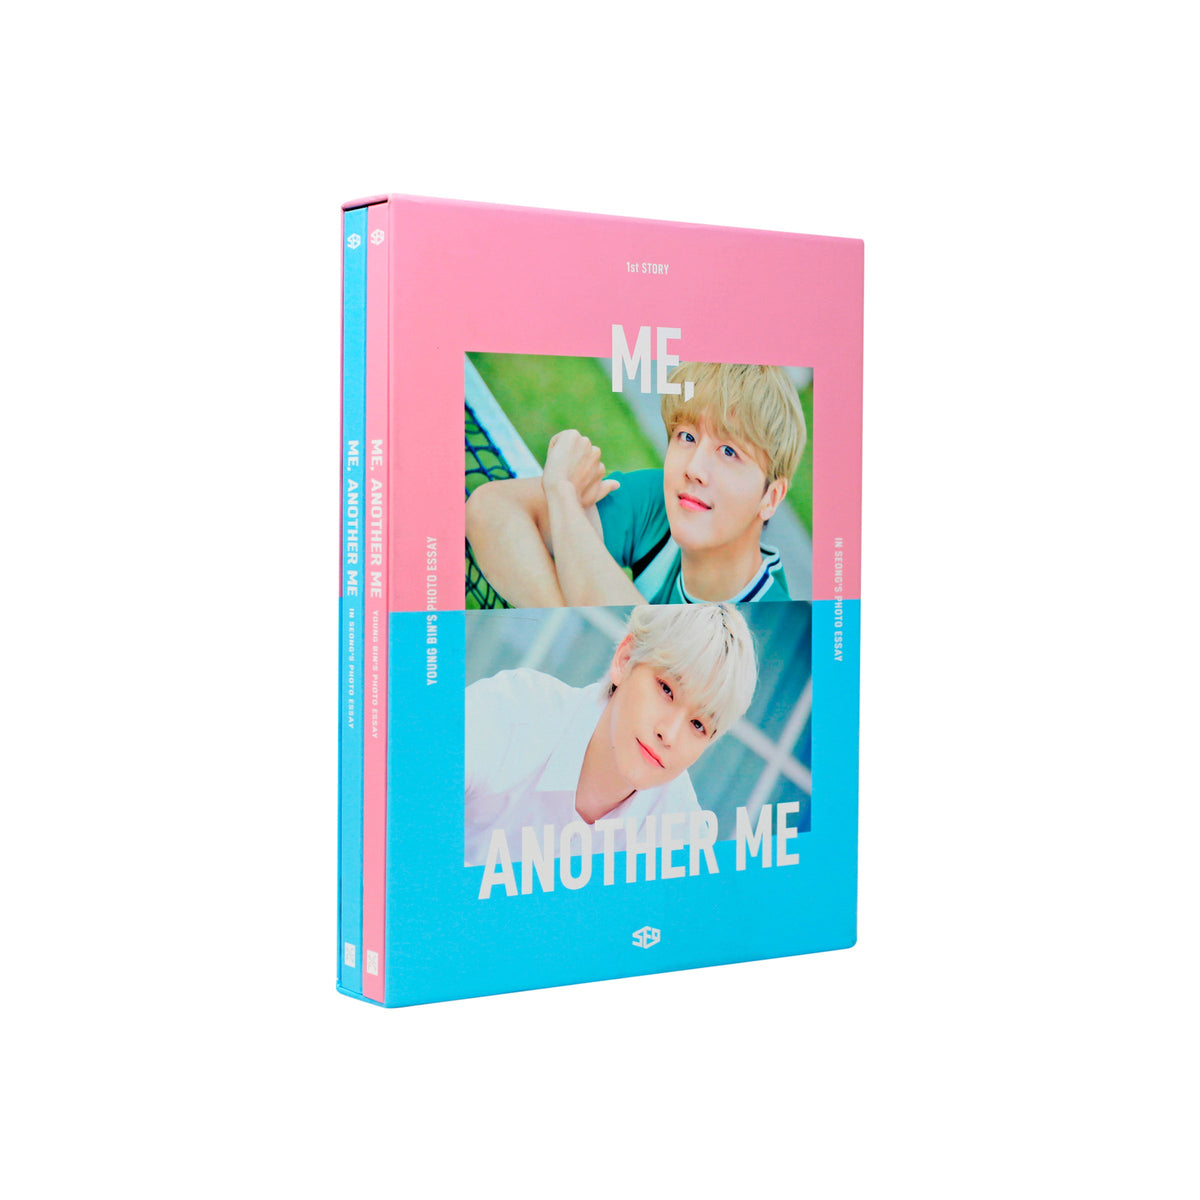 SF9 Young Bin &amp; Inseong - ME, ANOTHER ME Photo Essay Set 2 Variations Ver Main Image